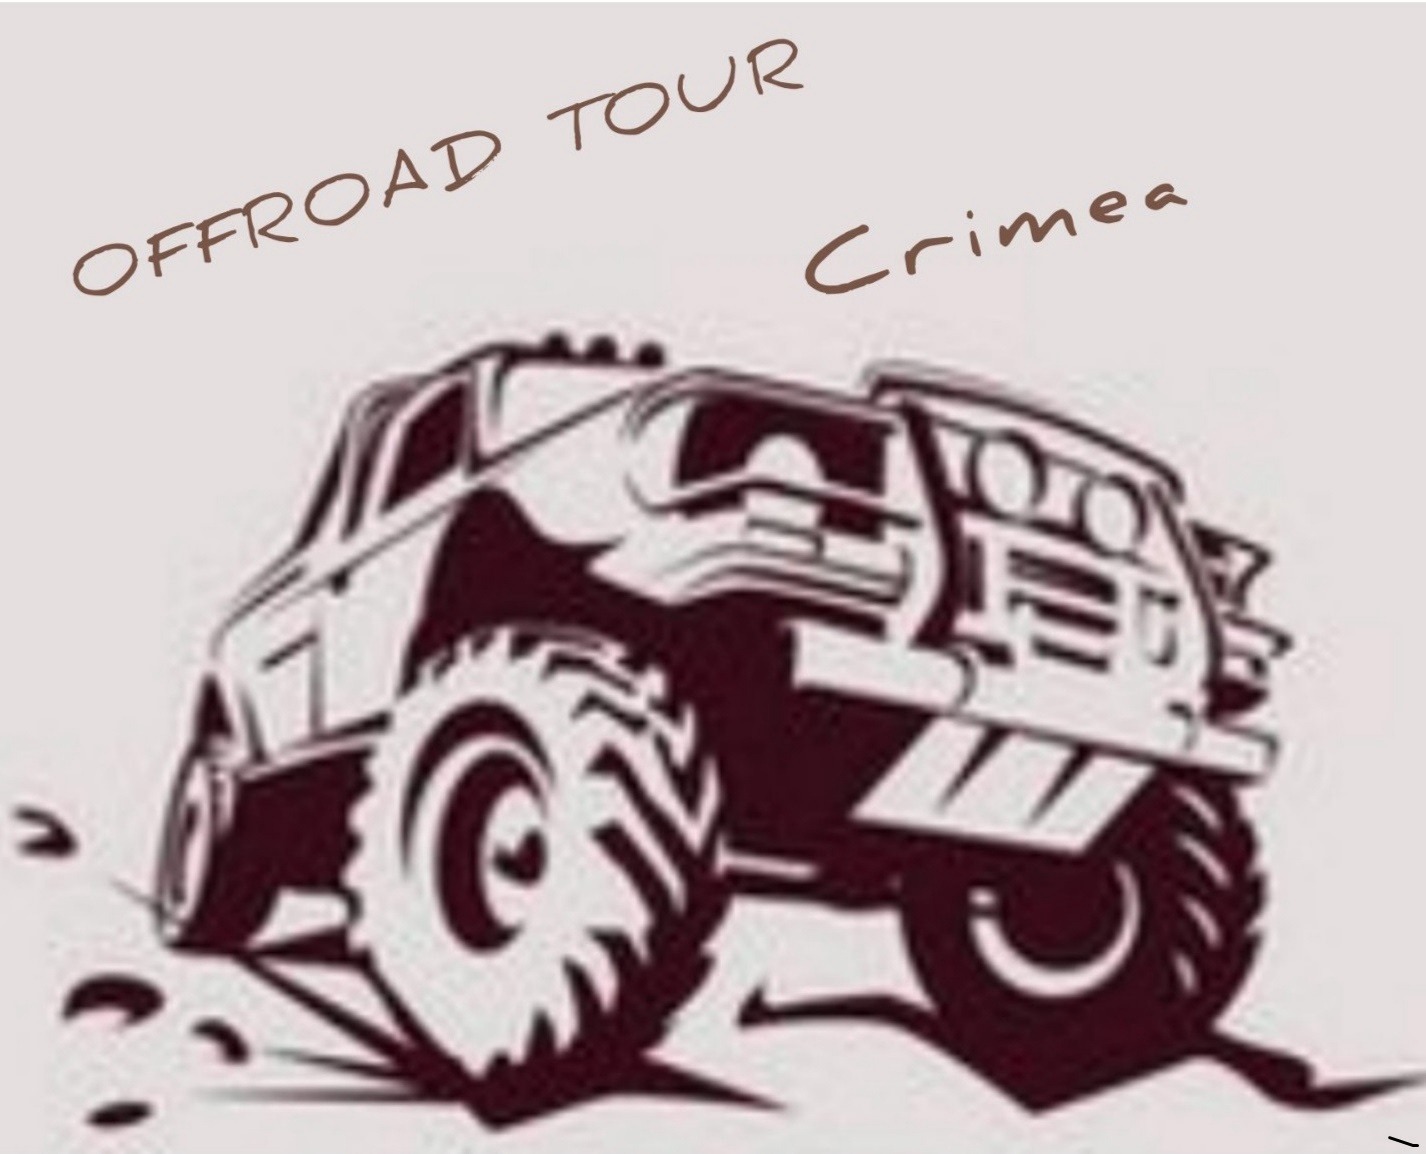 You are currently viewing Джиптур Offroad tour Crimea